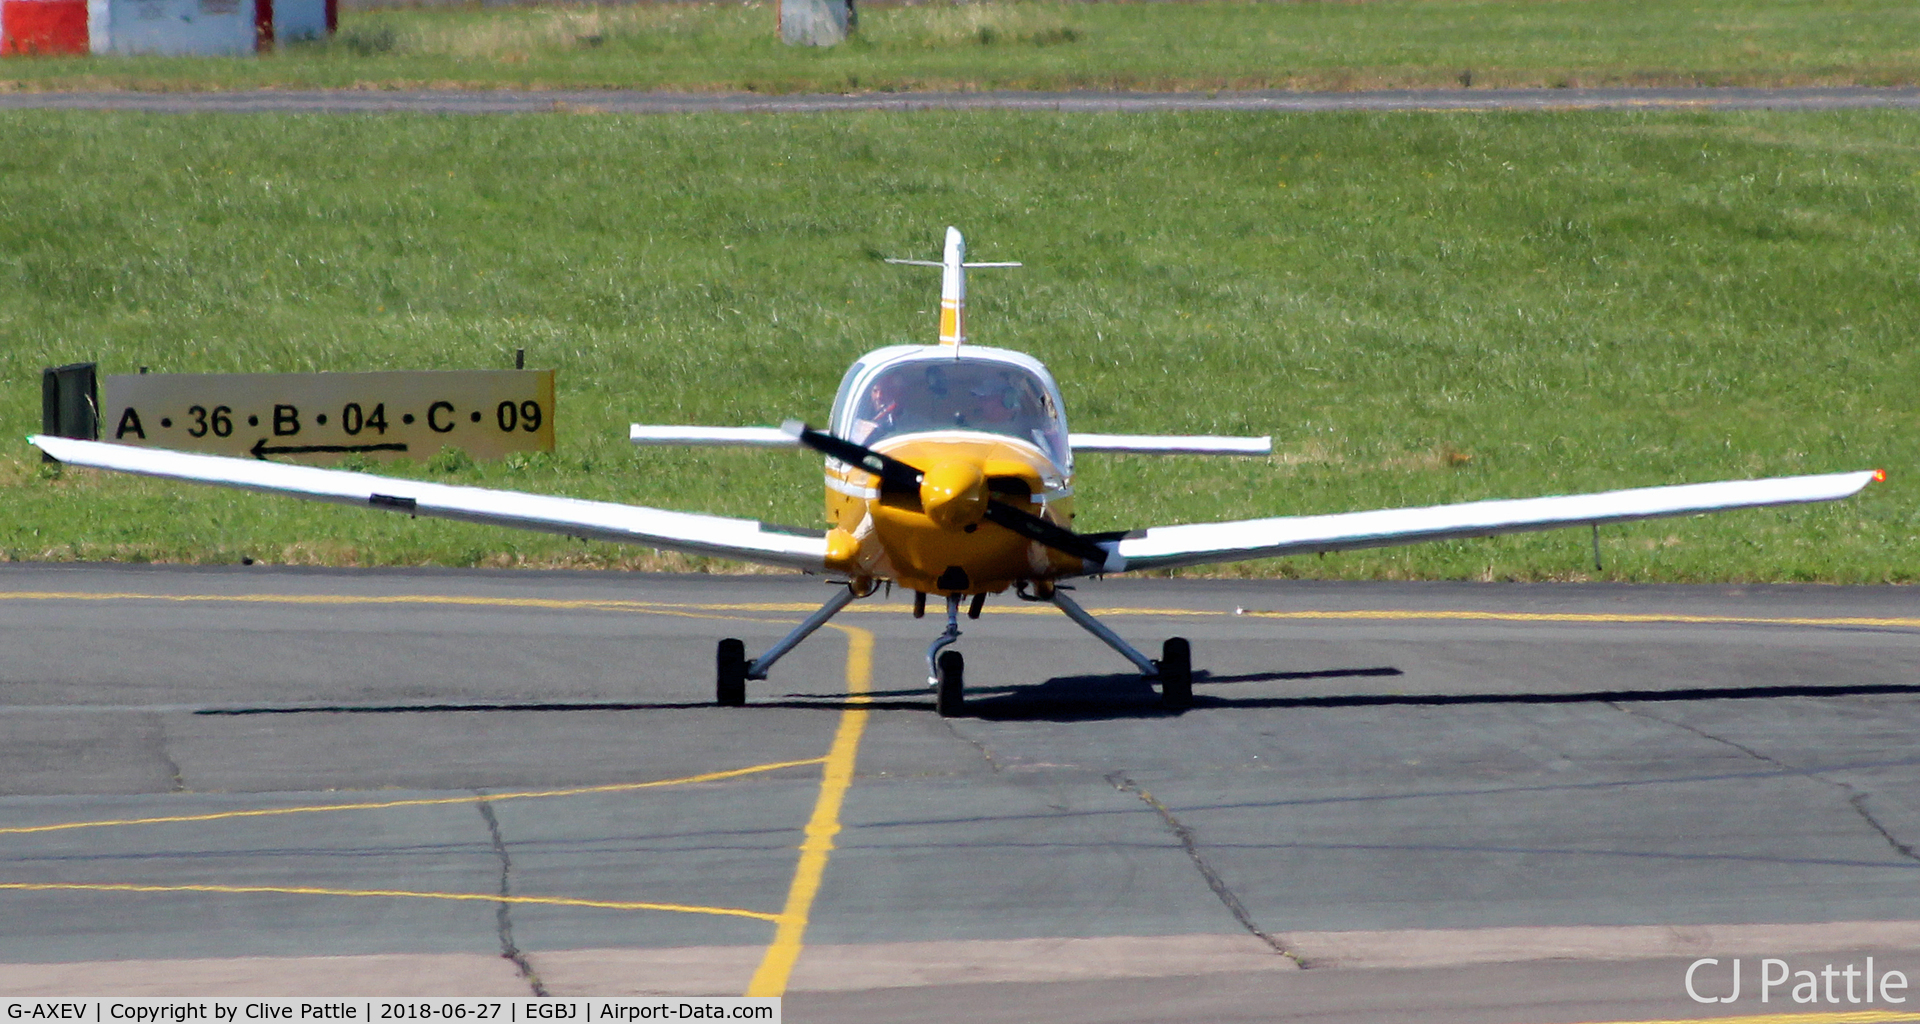 G-AXEV, 1969 Beagle B-121 Pup Series 2 (Pup 150) C/N B121-070, In action at EGBJ